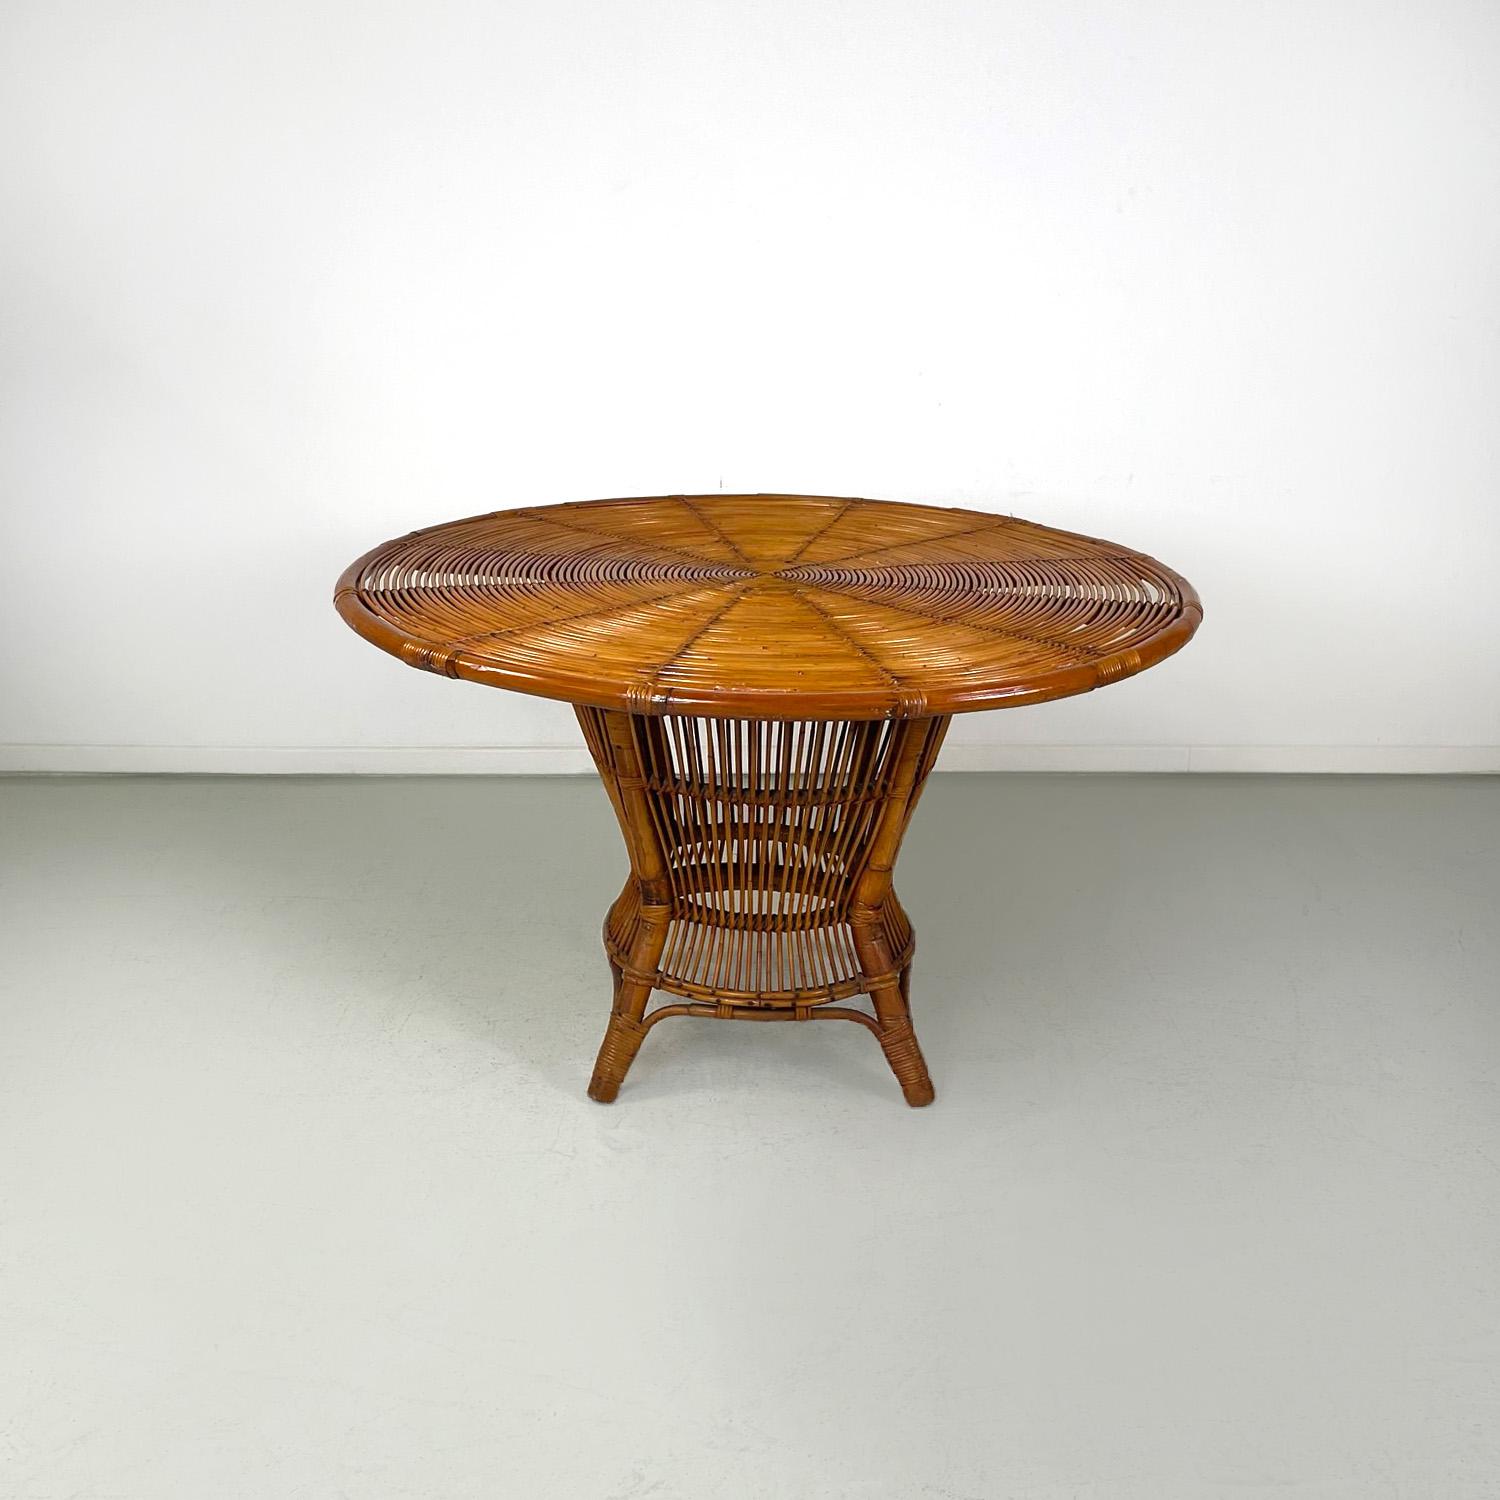 Italian mid-century modern spiral rattan bamboo four legs dining table, 1960s
Circular dining table in rattan. The table has a round top made up of a spiral motif. The lower part is made up of four bamboo legs initially intertwined to form a